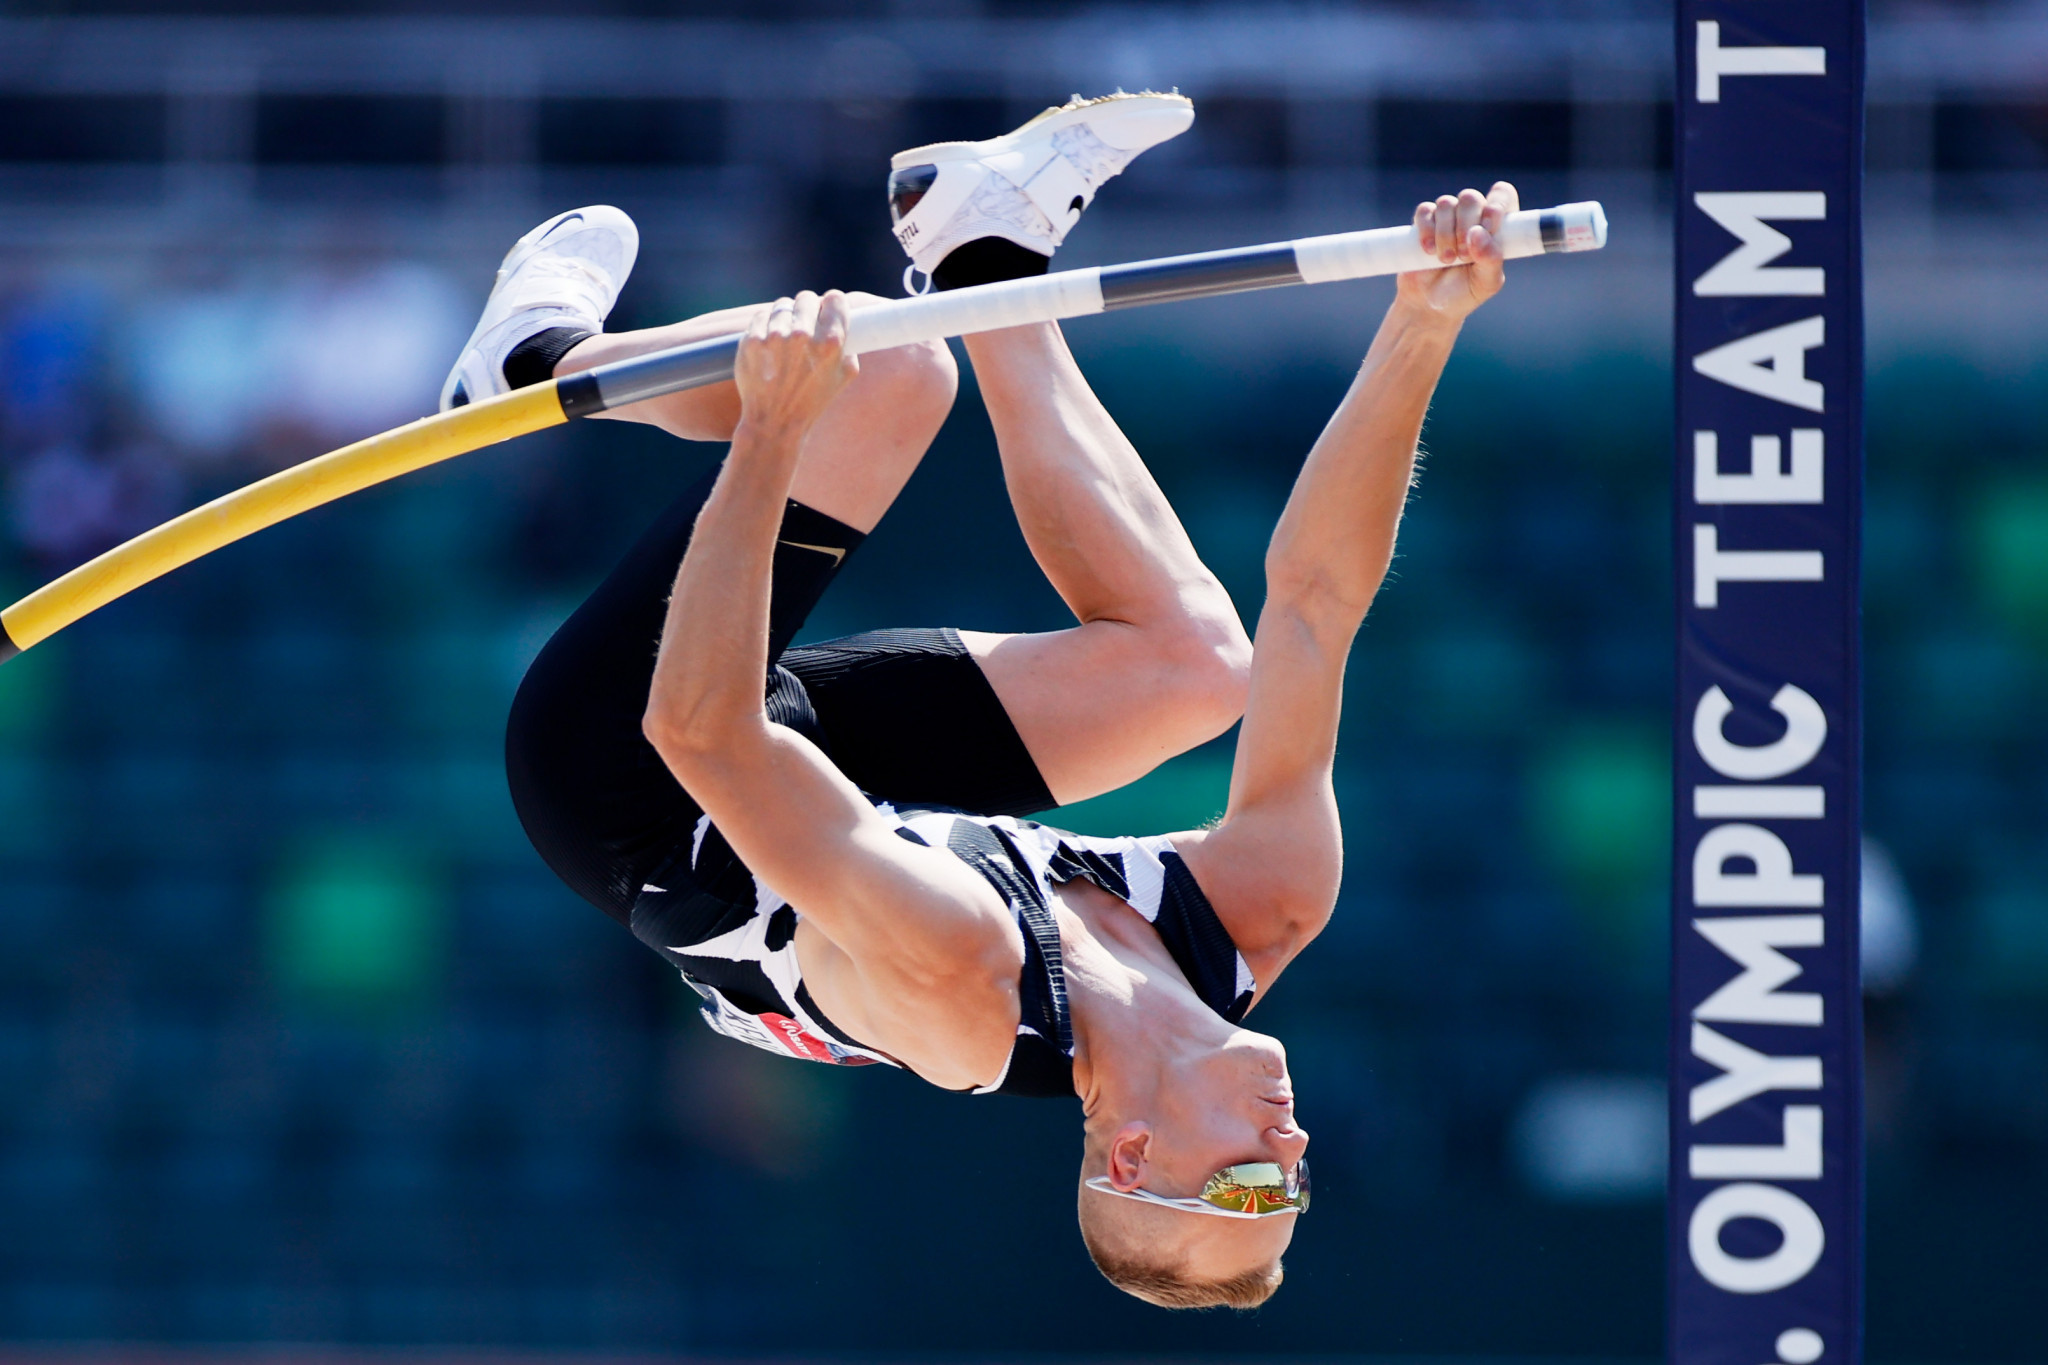 Pole vault world champion Sam Kendricks was among the athletes to miss the Olympics with COVID-19 ©Getty Images